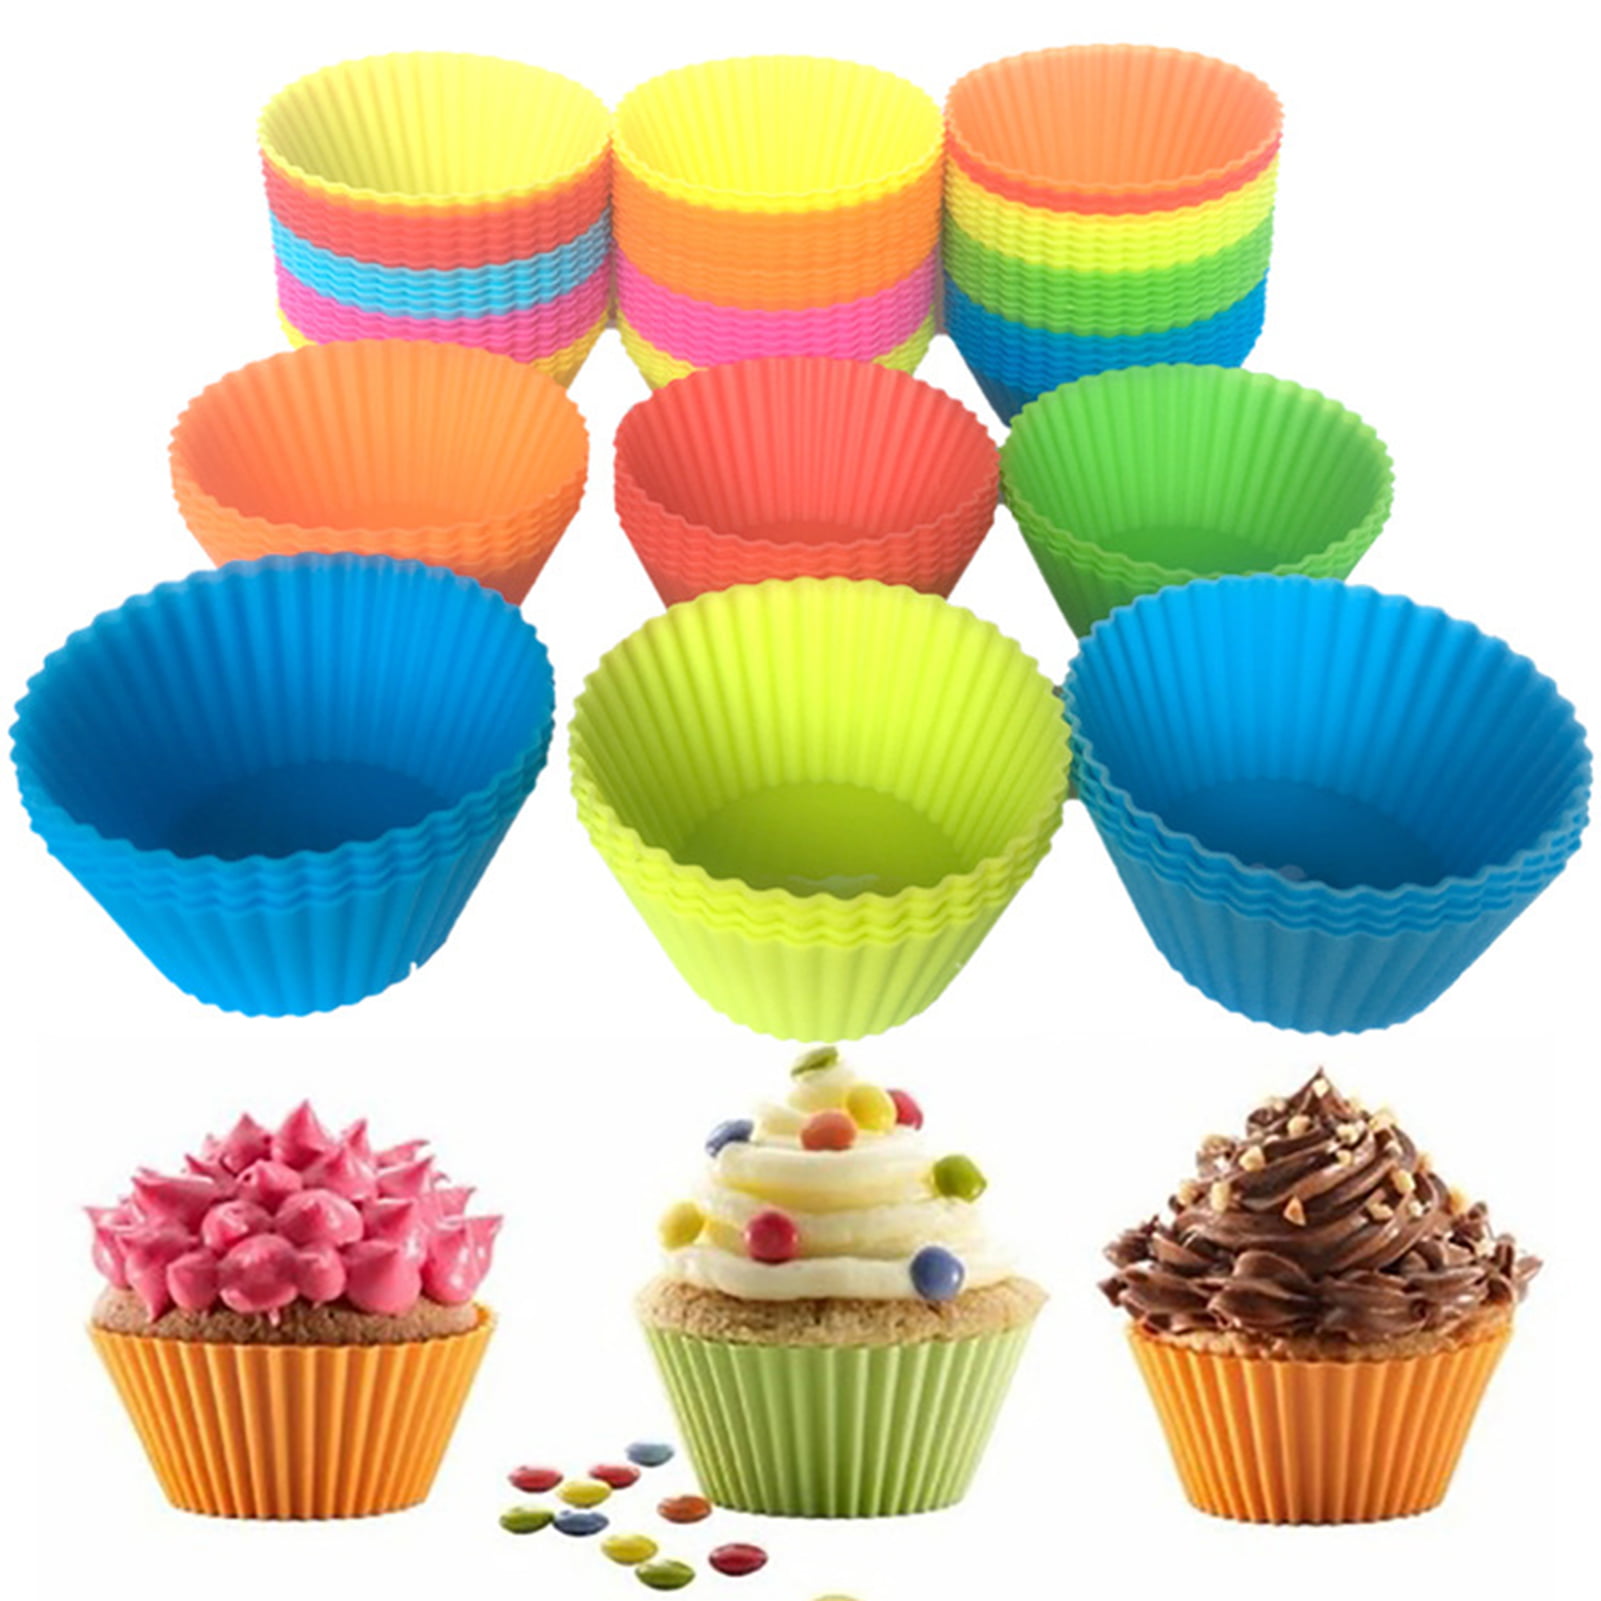 10pcs/pack Silicone Rectangle Cake Muffin Cupcake Chocolate Bake Cup Mold Random 